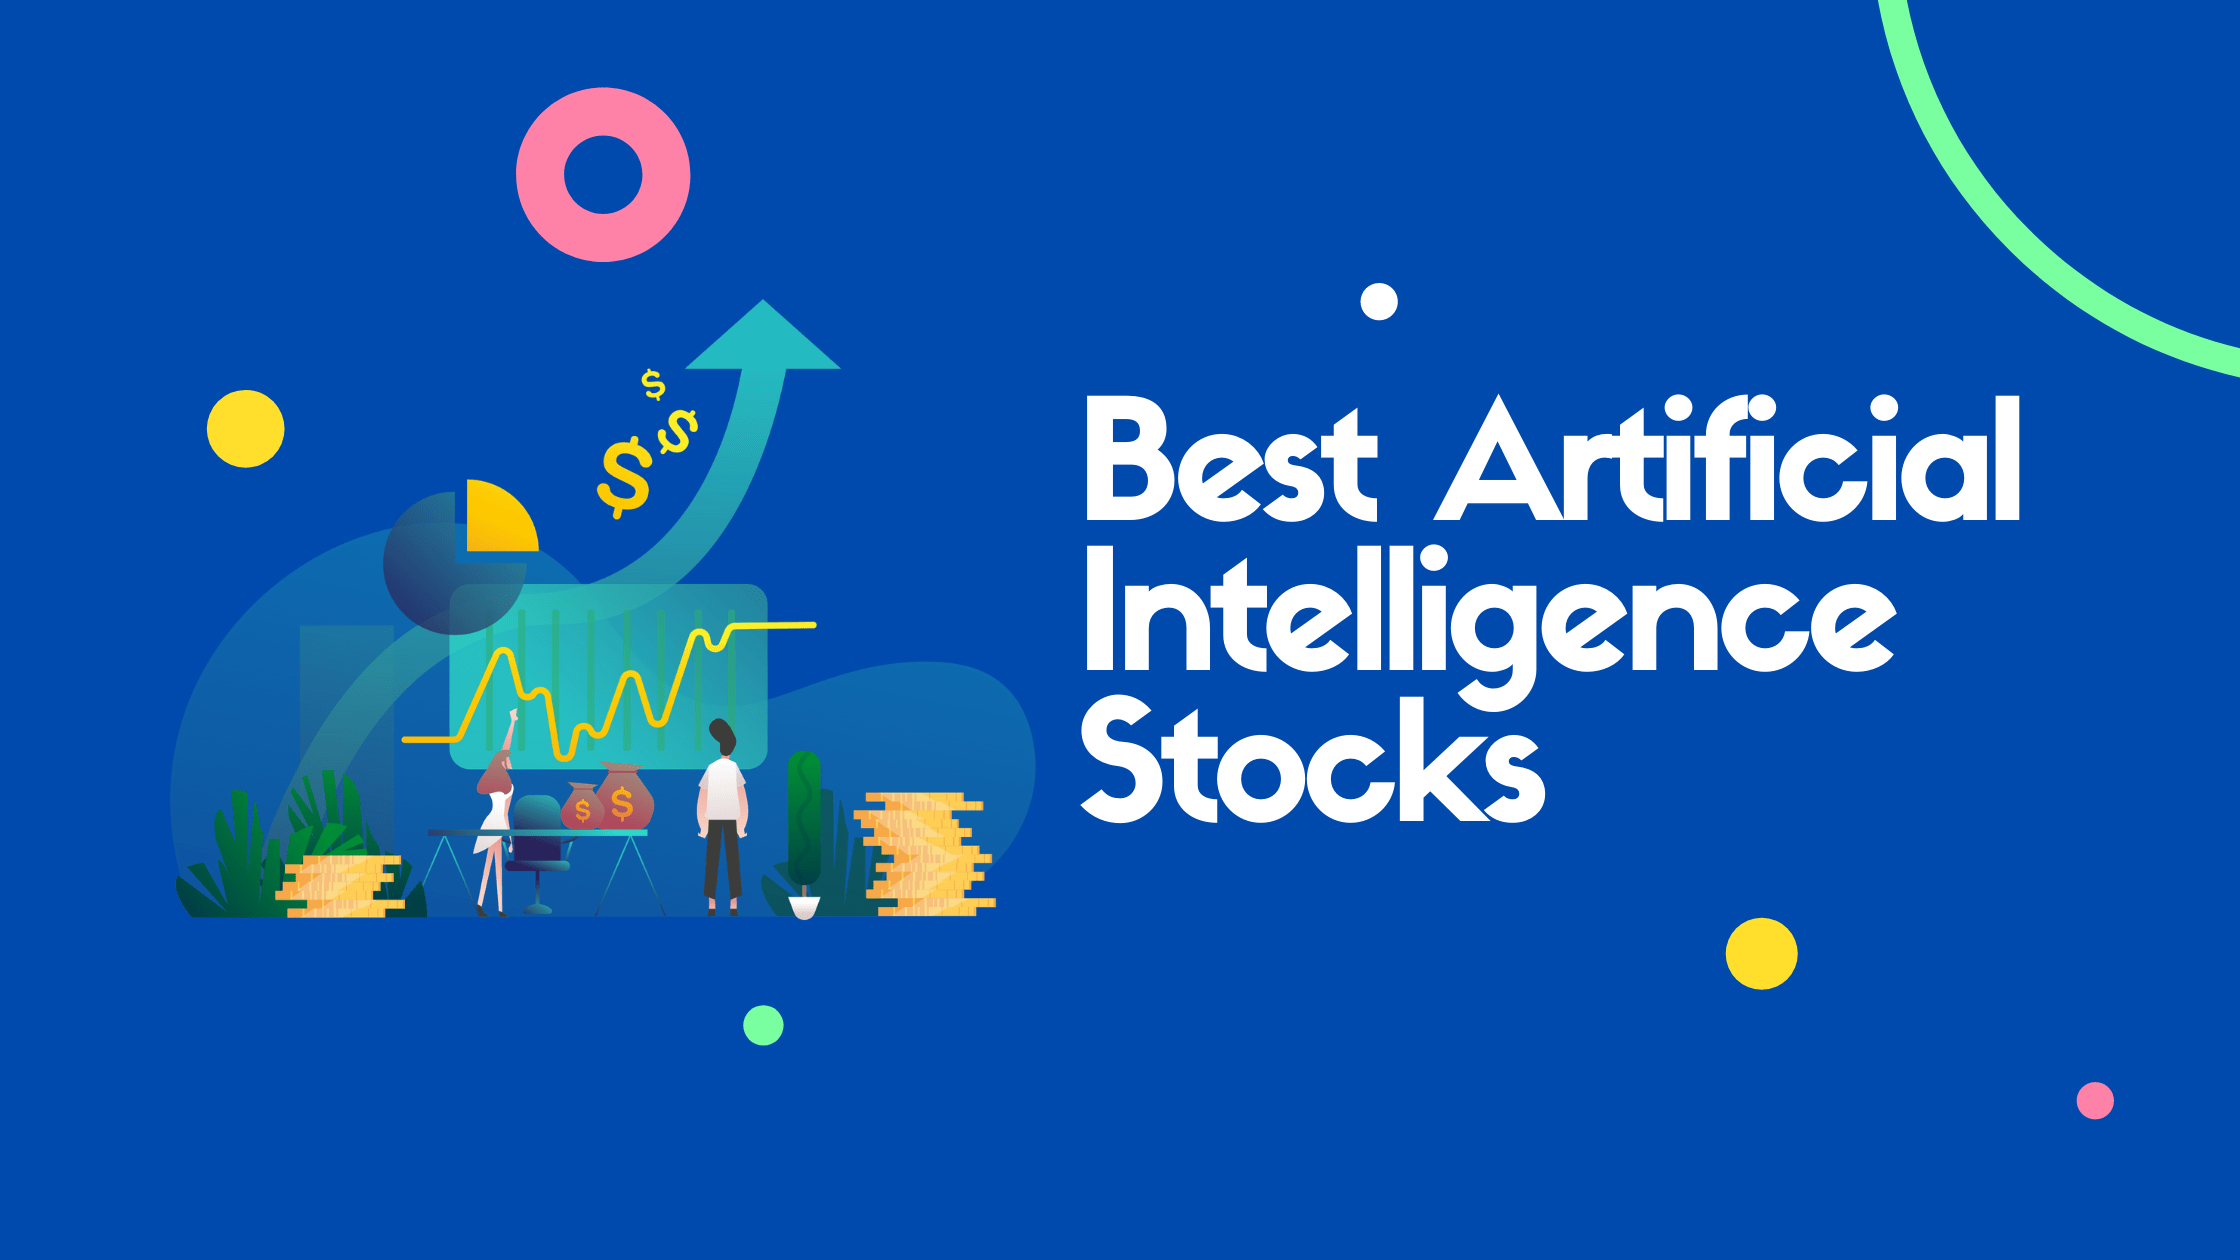 Top 10 Best Artificial Intelligence Stocks To Watch (2021)